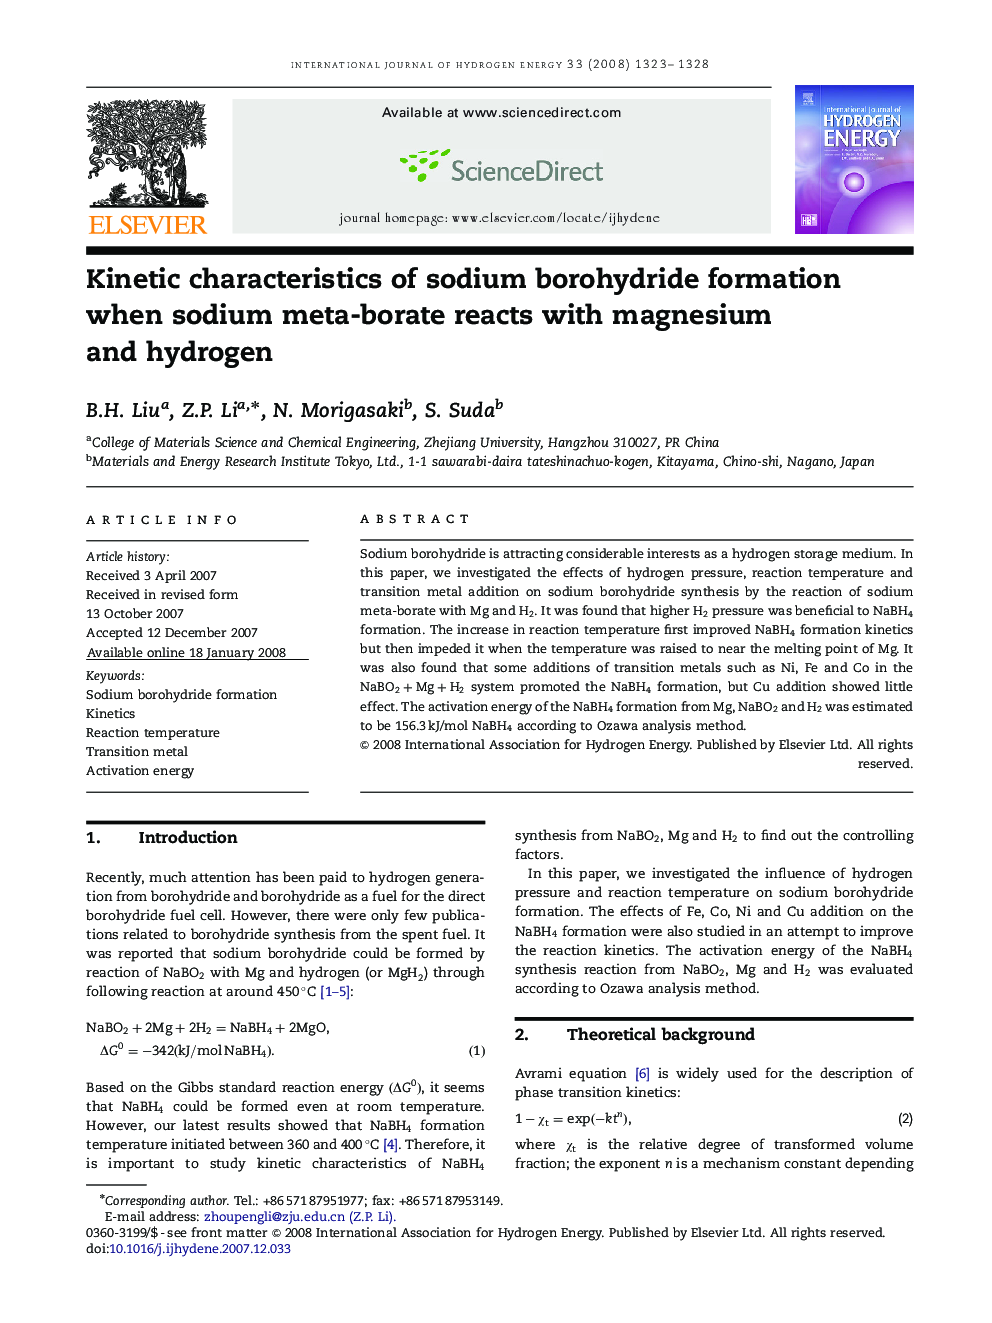 Kinetic characteristics of sodium borohydride formation when sodium meta-borate reacts with magnesium and hydrogen